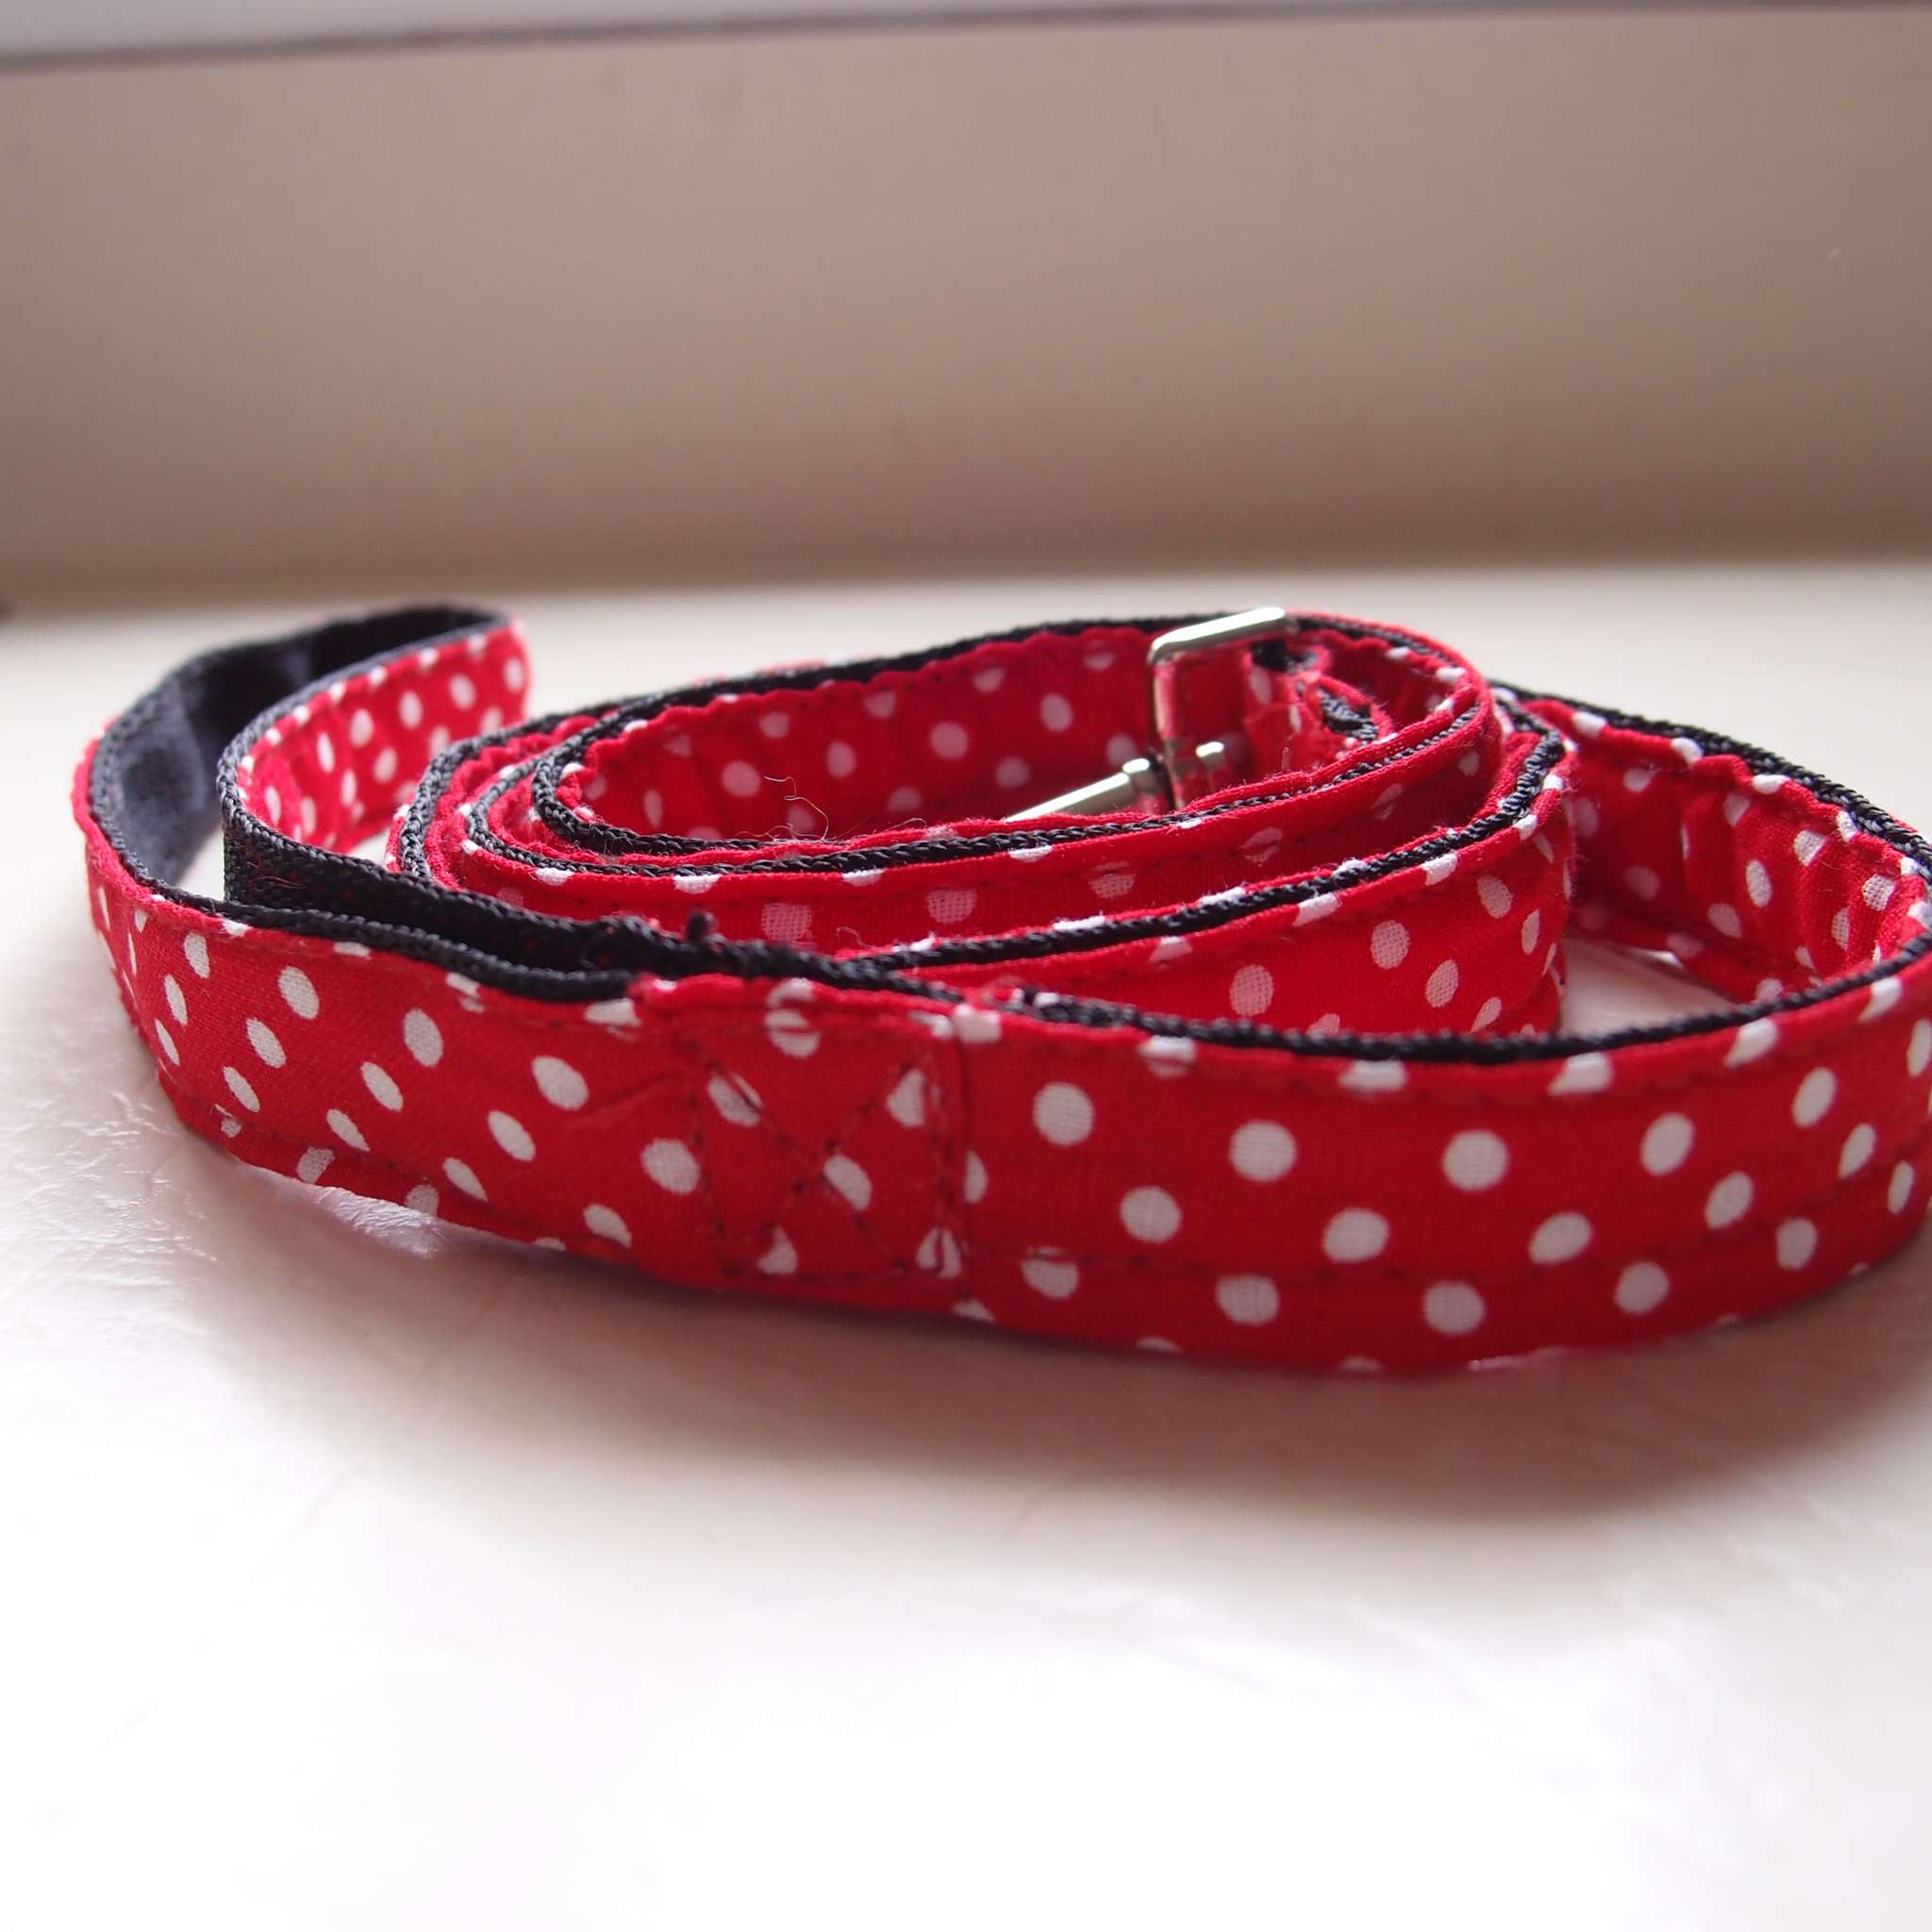 Red and white spot lead. – Collars by Chris